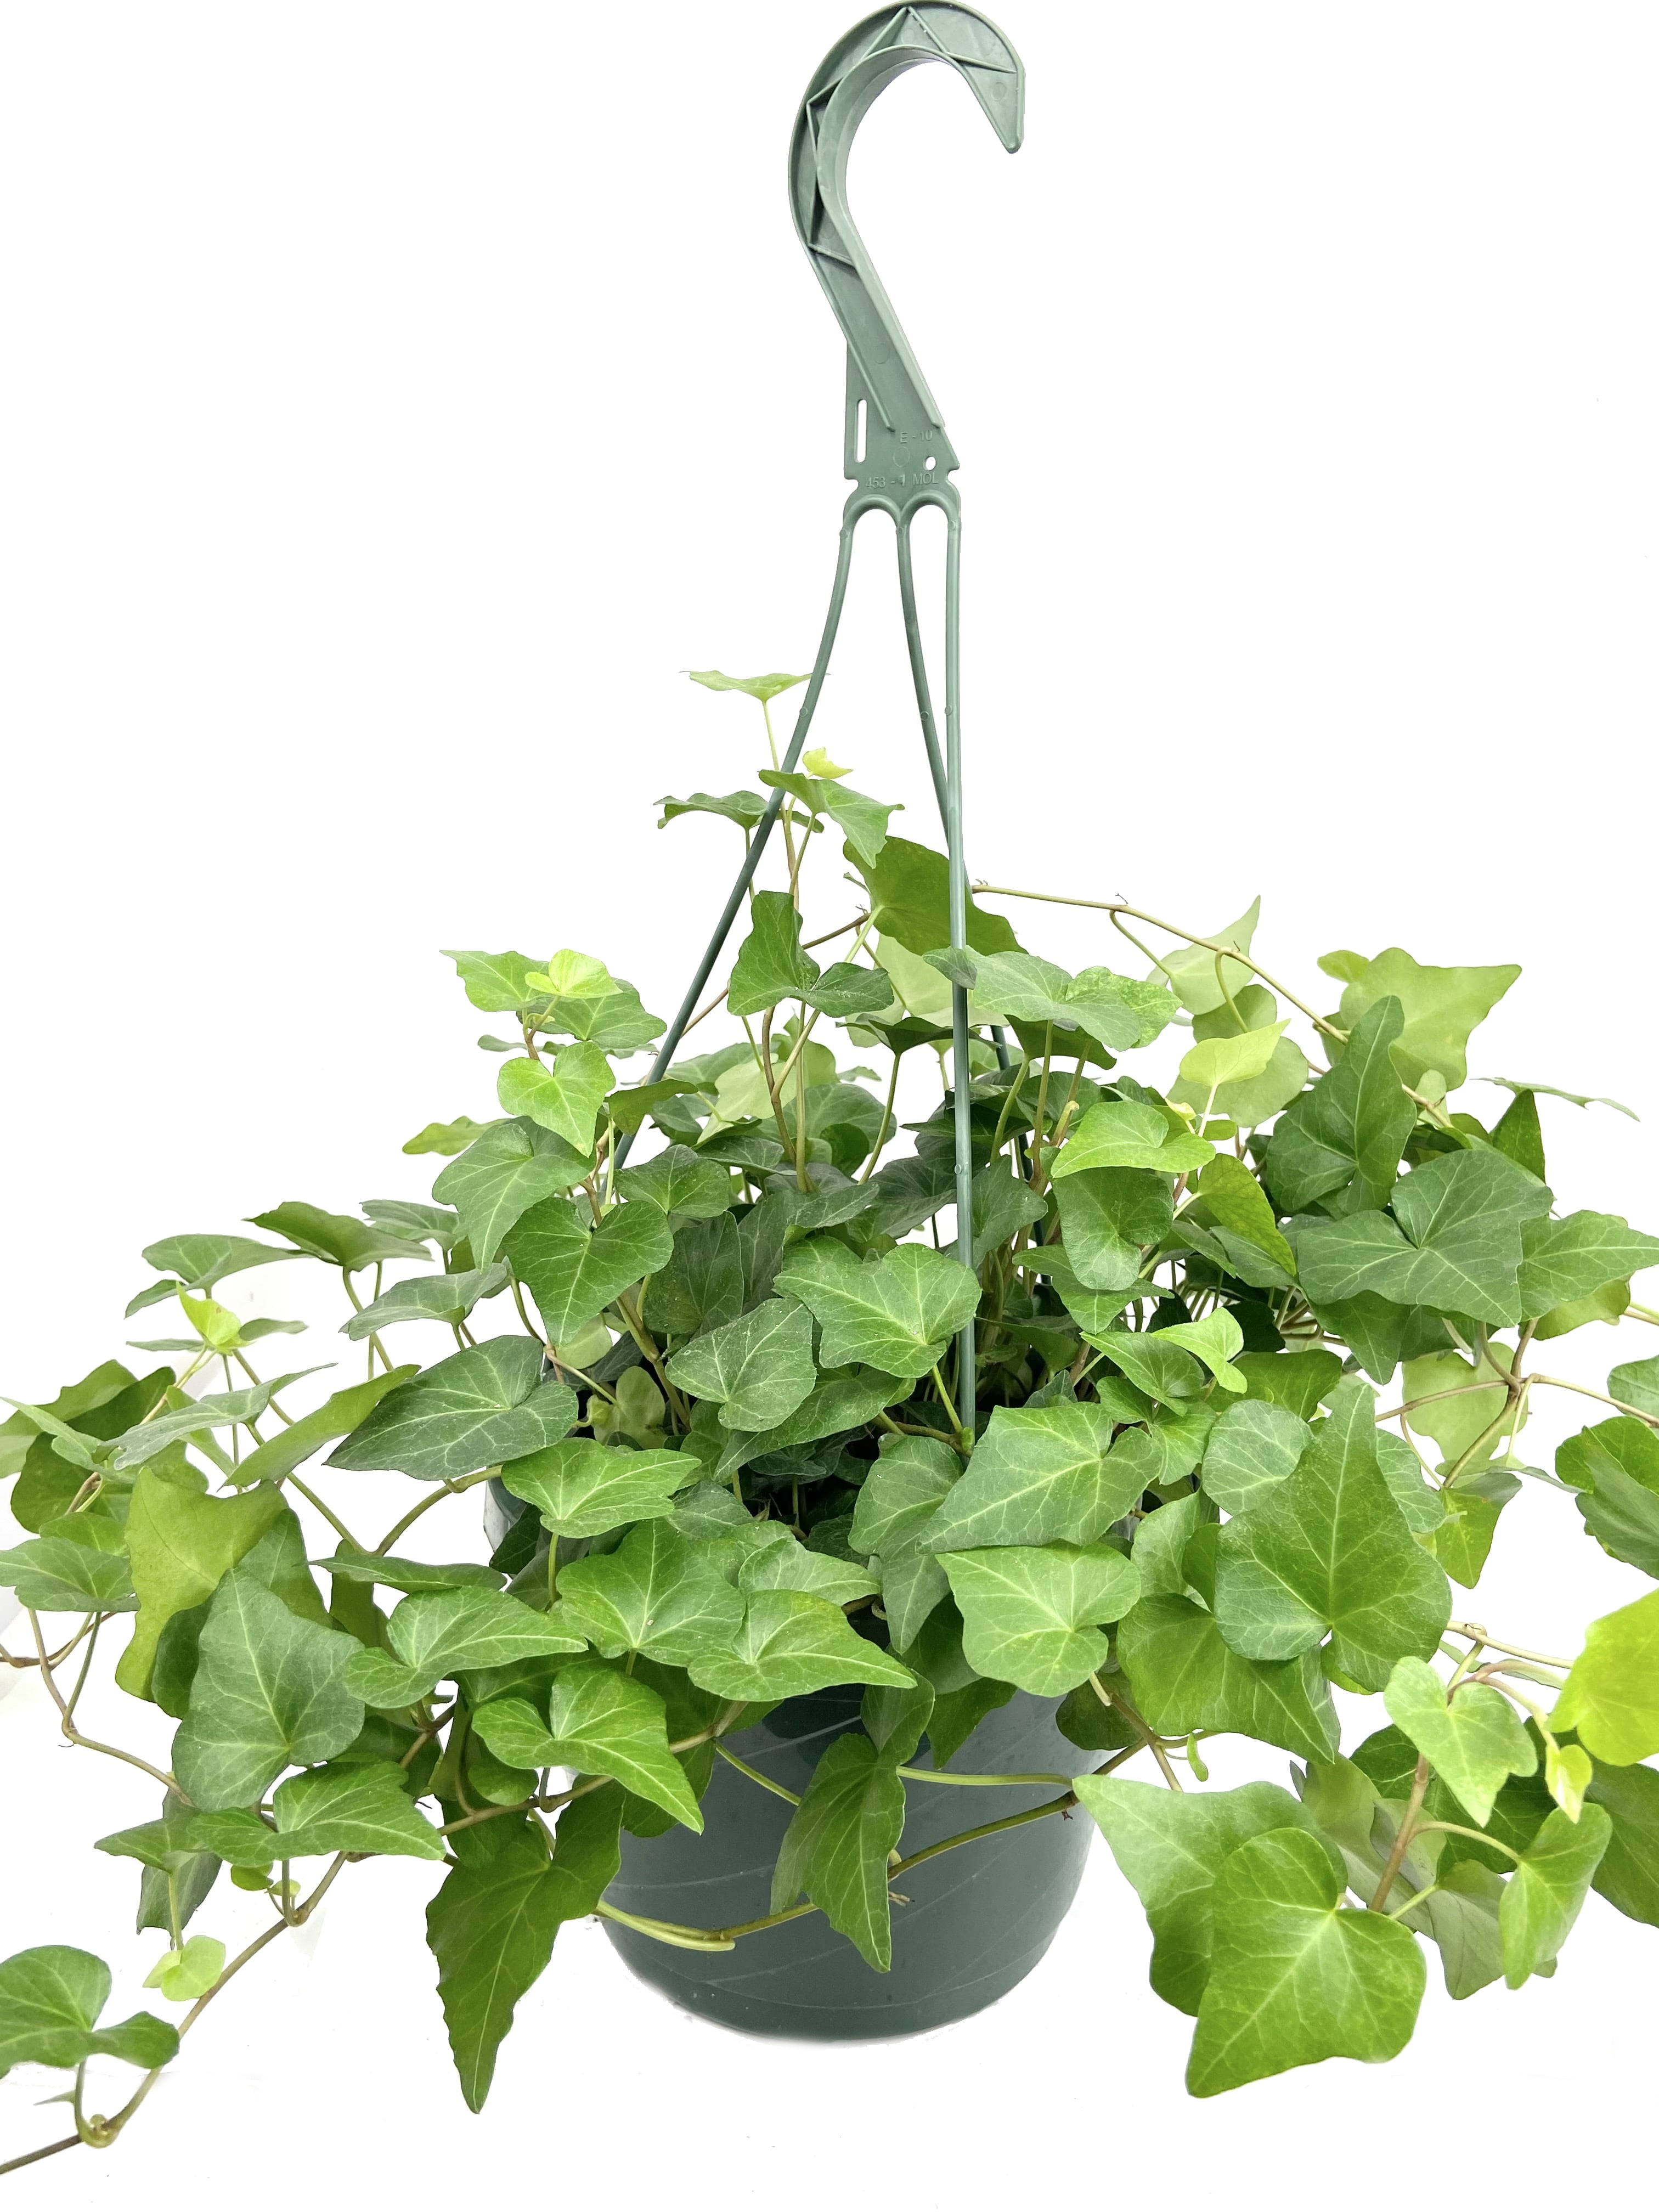 Refrein Grondwet halen Green English Ivy Hanging Basket - Live Plant in an 8 inch Pot - Hedera  Helix - Beautiful Easy Care Indoor Air Purifying Houseplant Vine -  Walmart.com